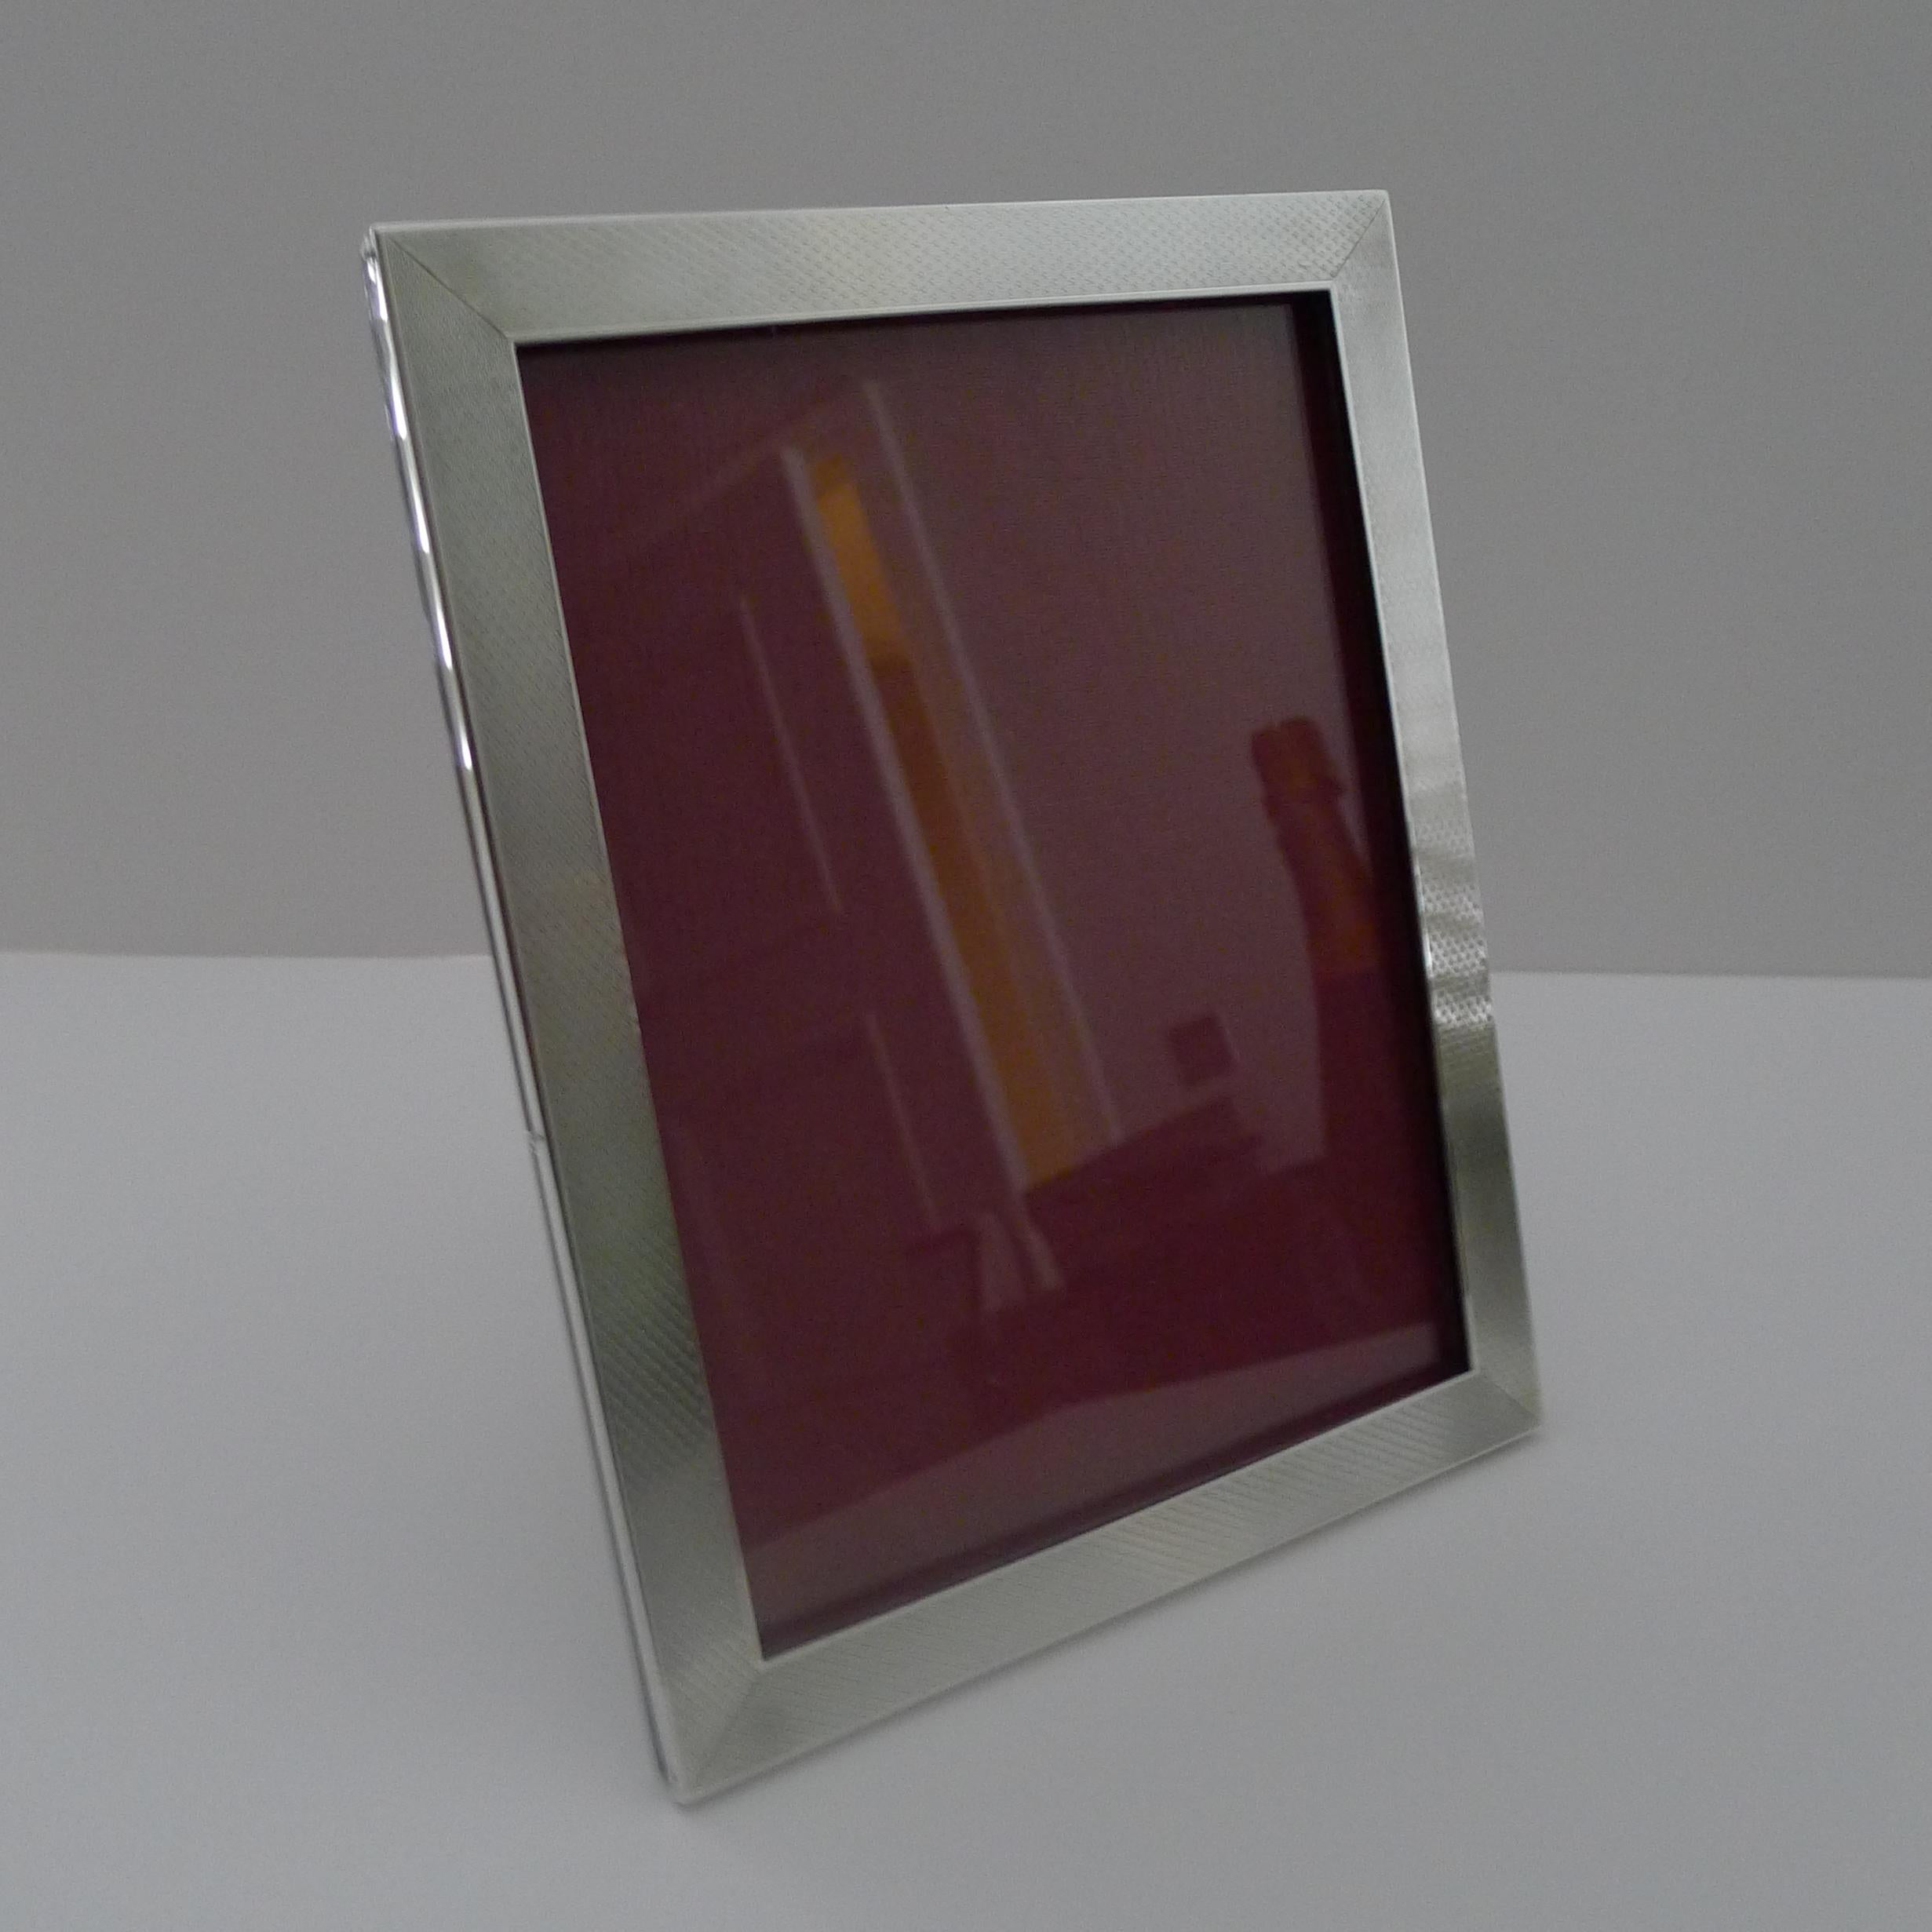 A smart and elegant photograph frame made from English solid silver backed with solid English Oak, incorporating a two-way folding easel stand; allowing for the frame to be used in both a landscape and portrait configuration.

The silver is